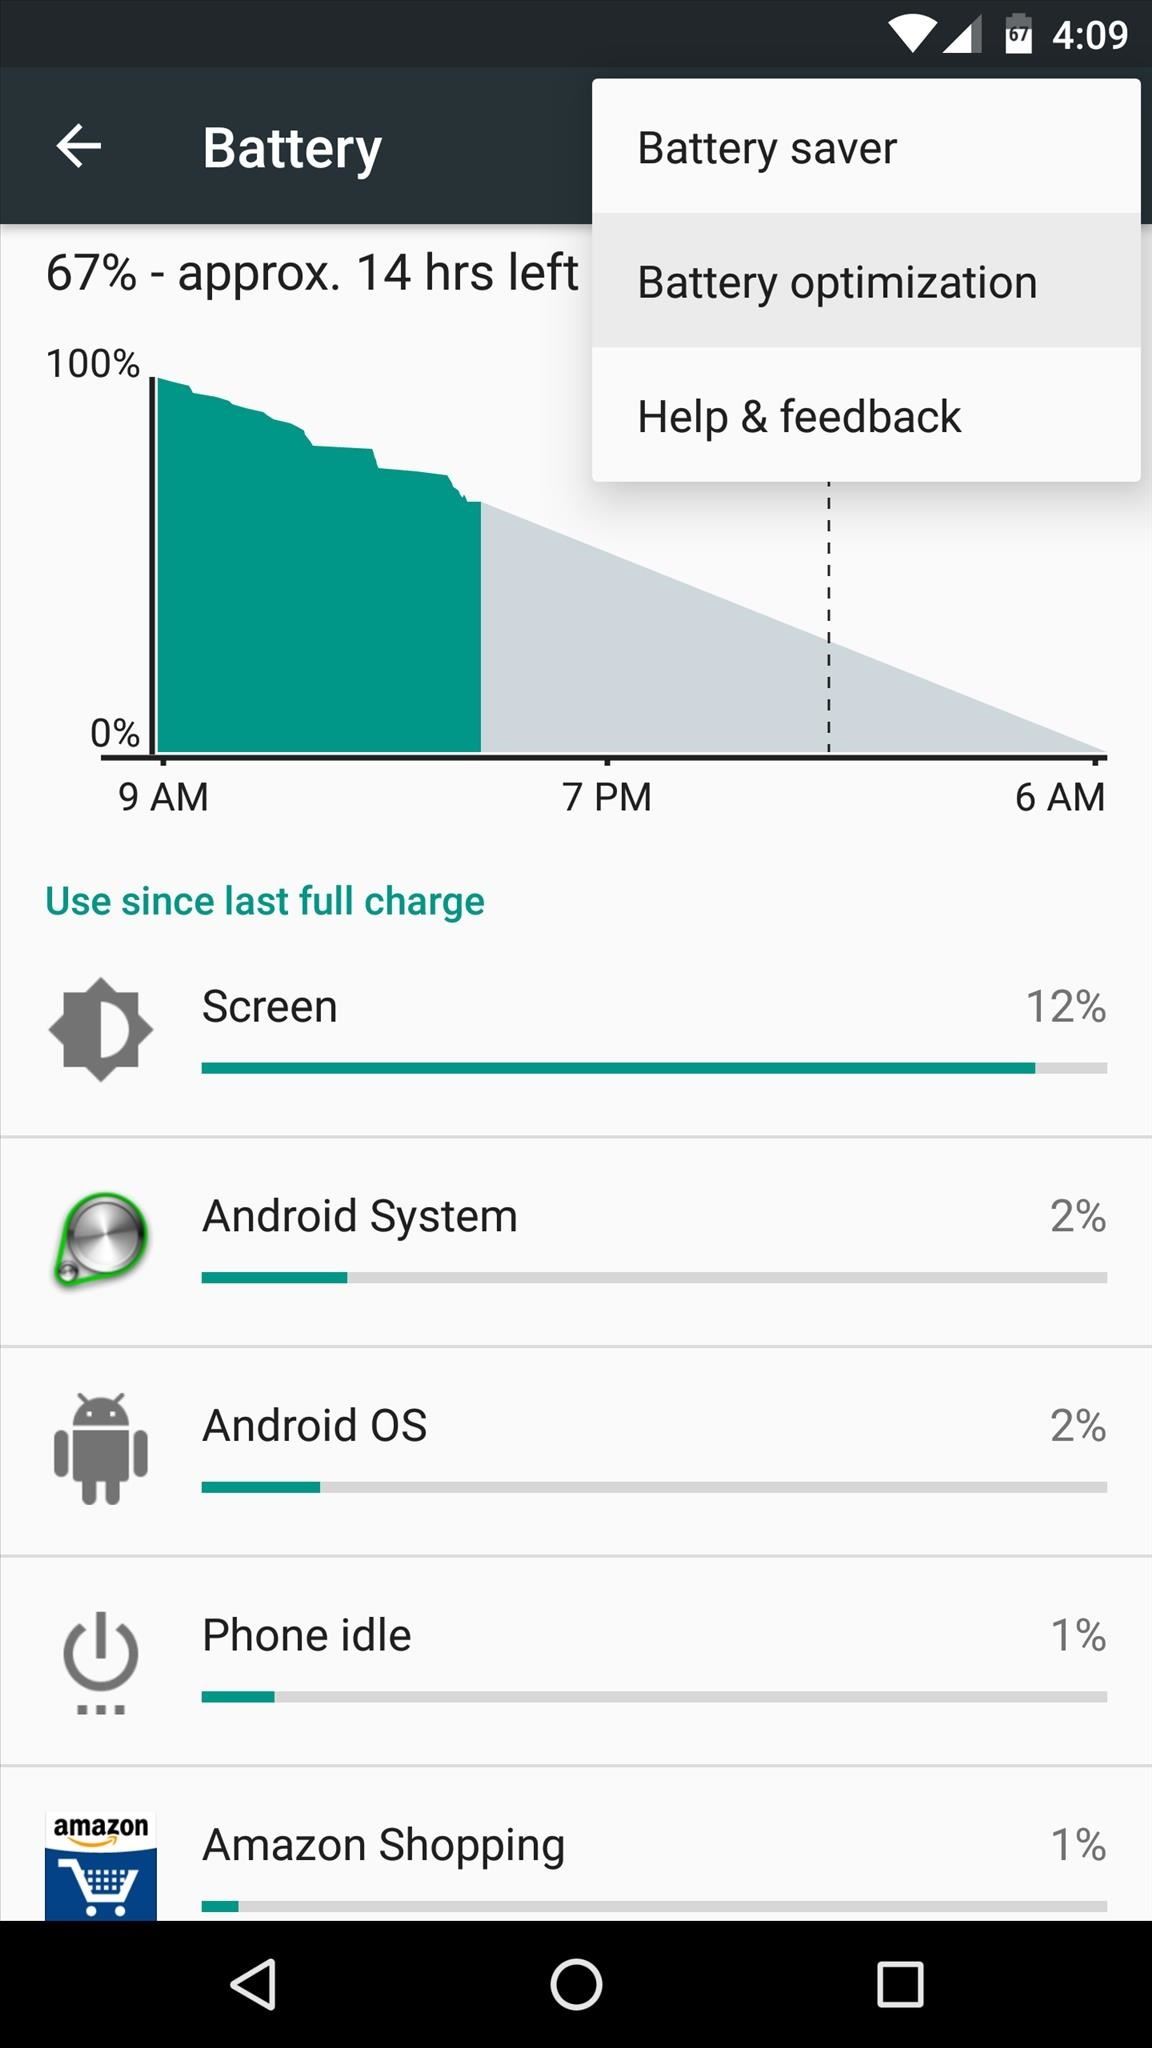 Android Basics: How to Disable Doze & App Standby for Individual Apps